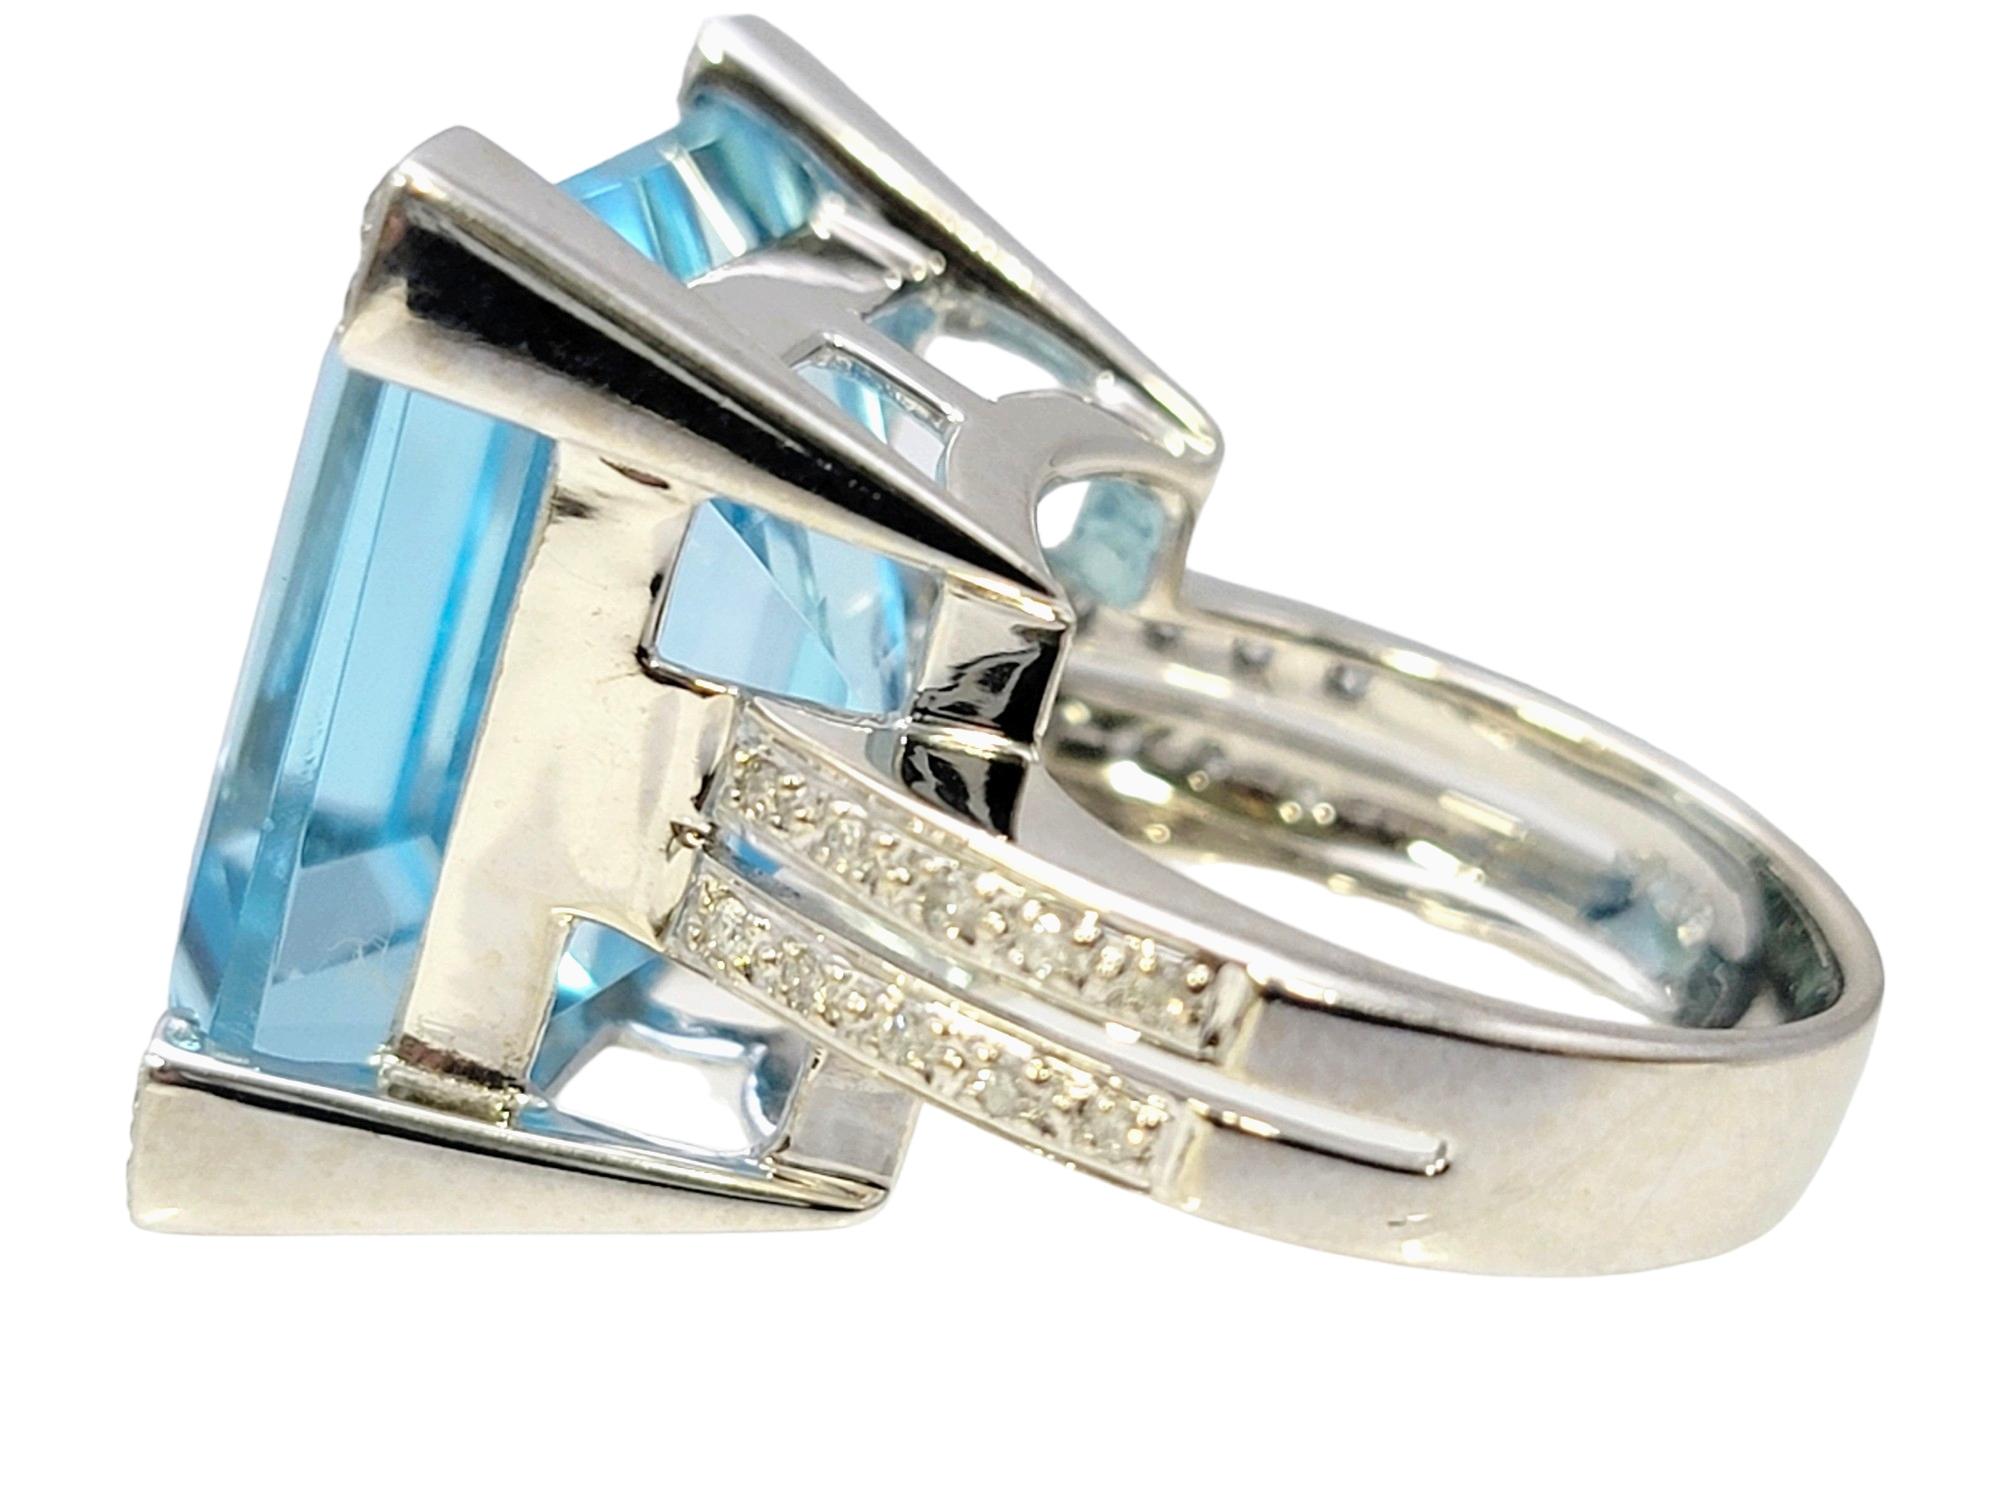 Tous 34.62 Carat Square Blue Topaz Cocktail Ring with Diamonds in 18 Karat Gold  In Good Condition For Sale In Scottsdale, AZ